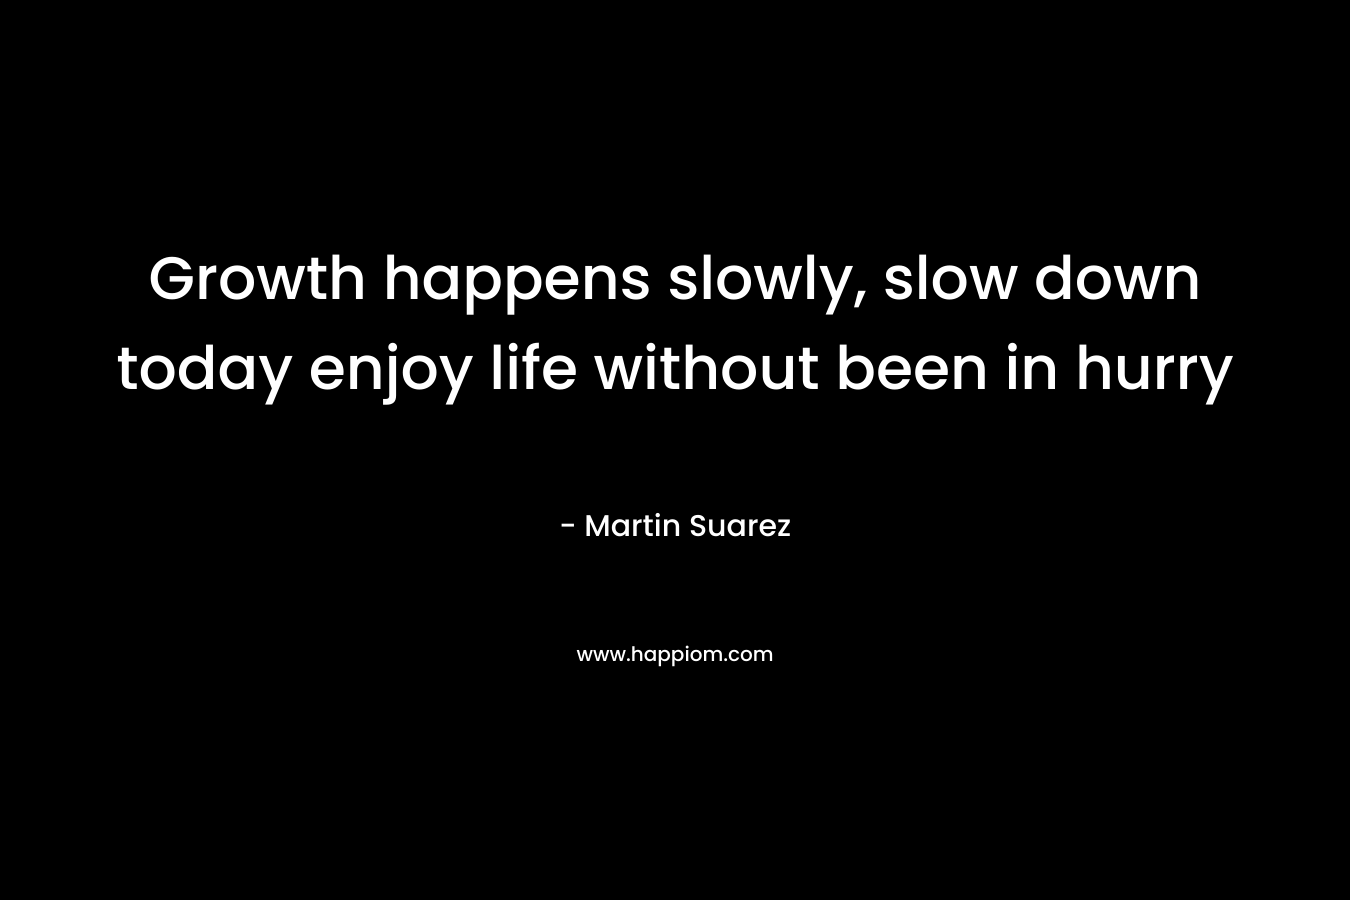 Growth happens slowly, slow down today enjoy life without been in hurry